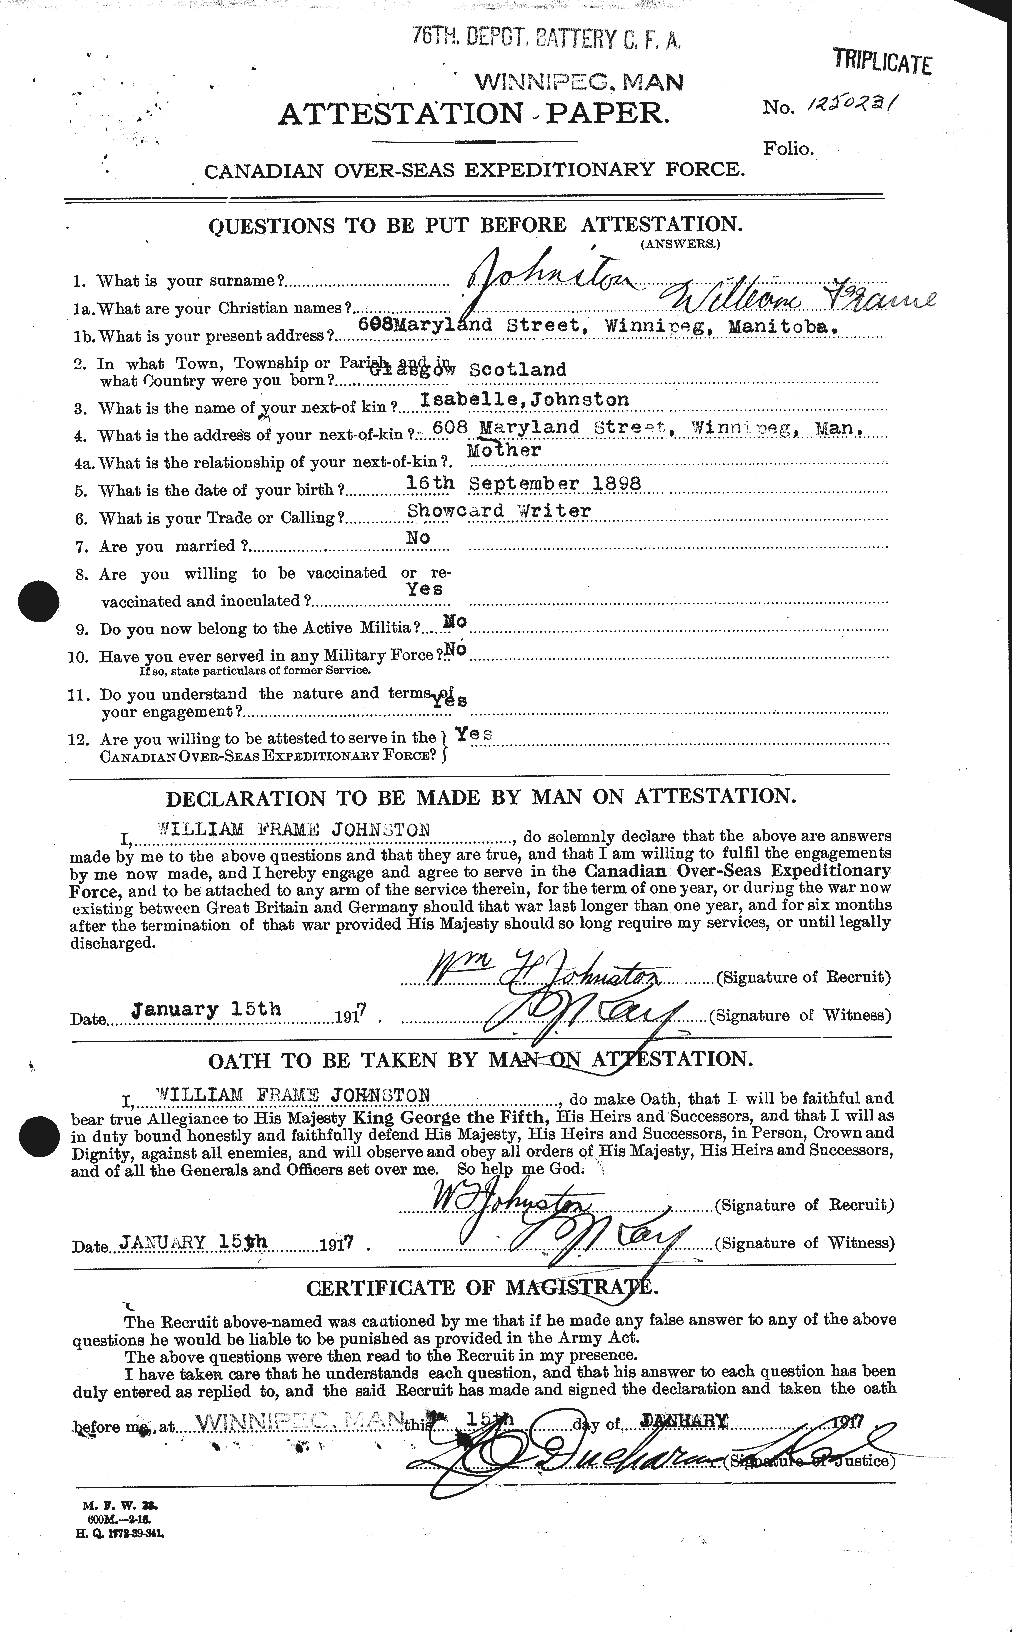 Personnel Records of the First World War - CEF 427324a